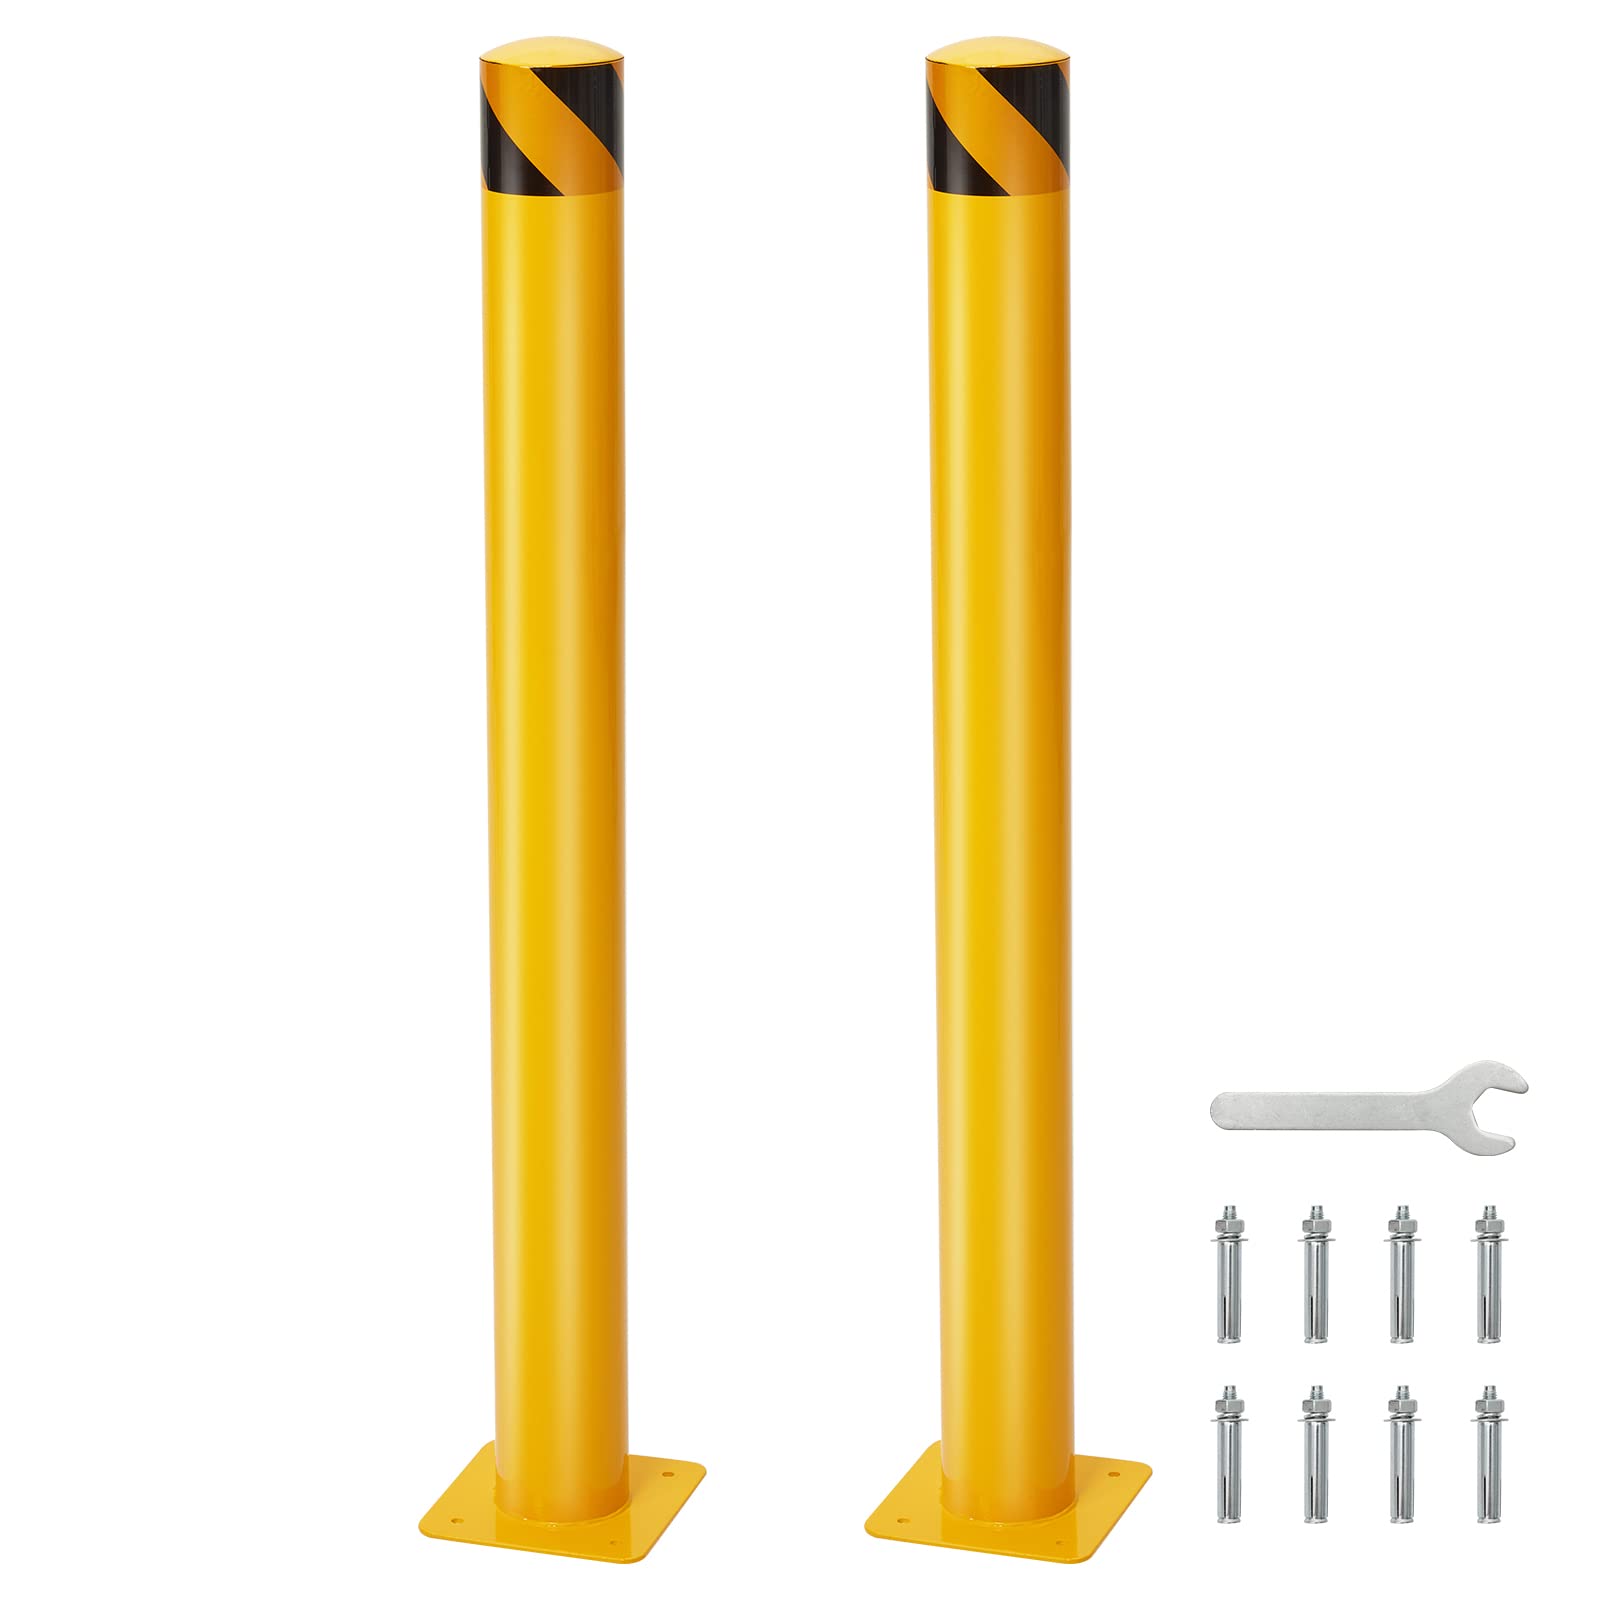 2 Pack 36" Yellow Safety Bollards for Driveway & Parking